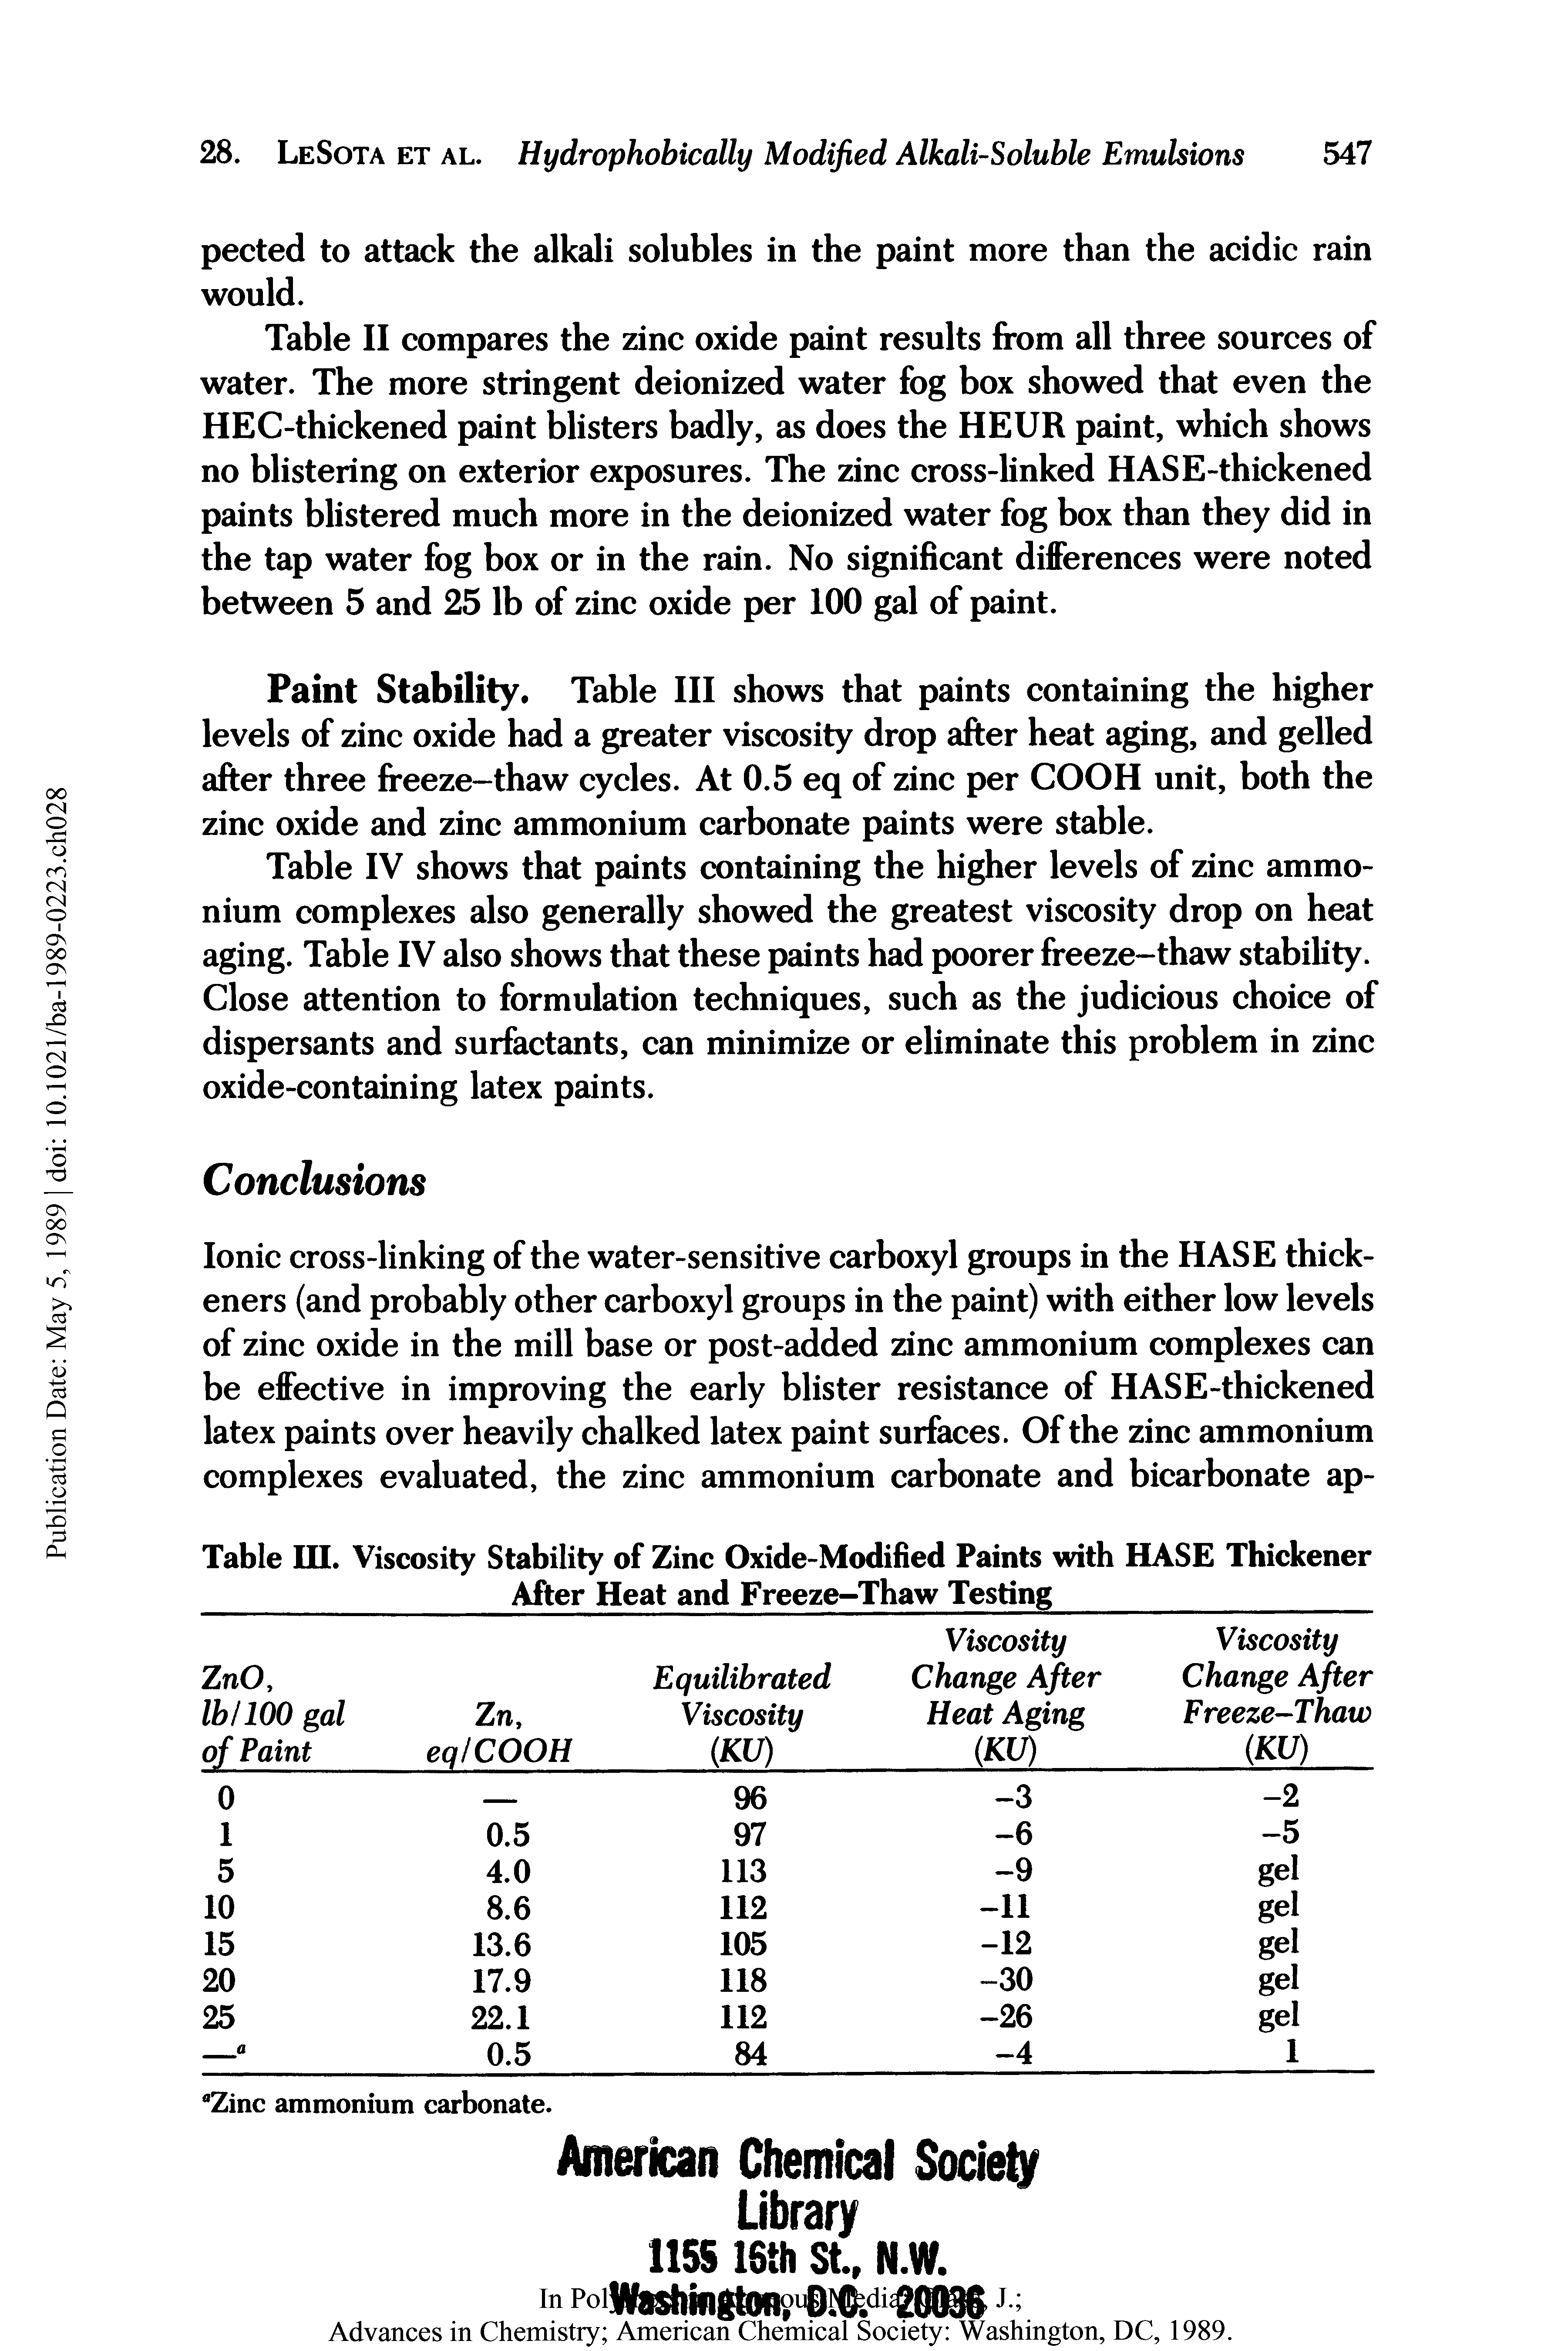 Table II compares the zinc oxide paint results from all three sources of water. The more stringent deionized water fog box showed that even the HEC-thickened paint blisters badly, as does the HEUR paint, which shows no blistering on exterior exposures. The zinc cross-linked HASE-thickened paints blistered much more in the deionized water fog box than they did in the tap water fog box or in the rain. No significant differences were noted between 5 and 25 lb of zinc oxide per 100 gal of paint.